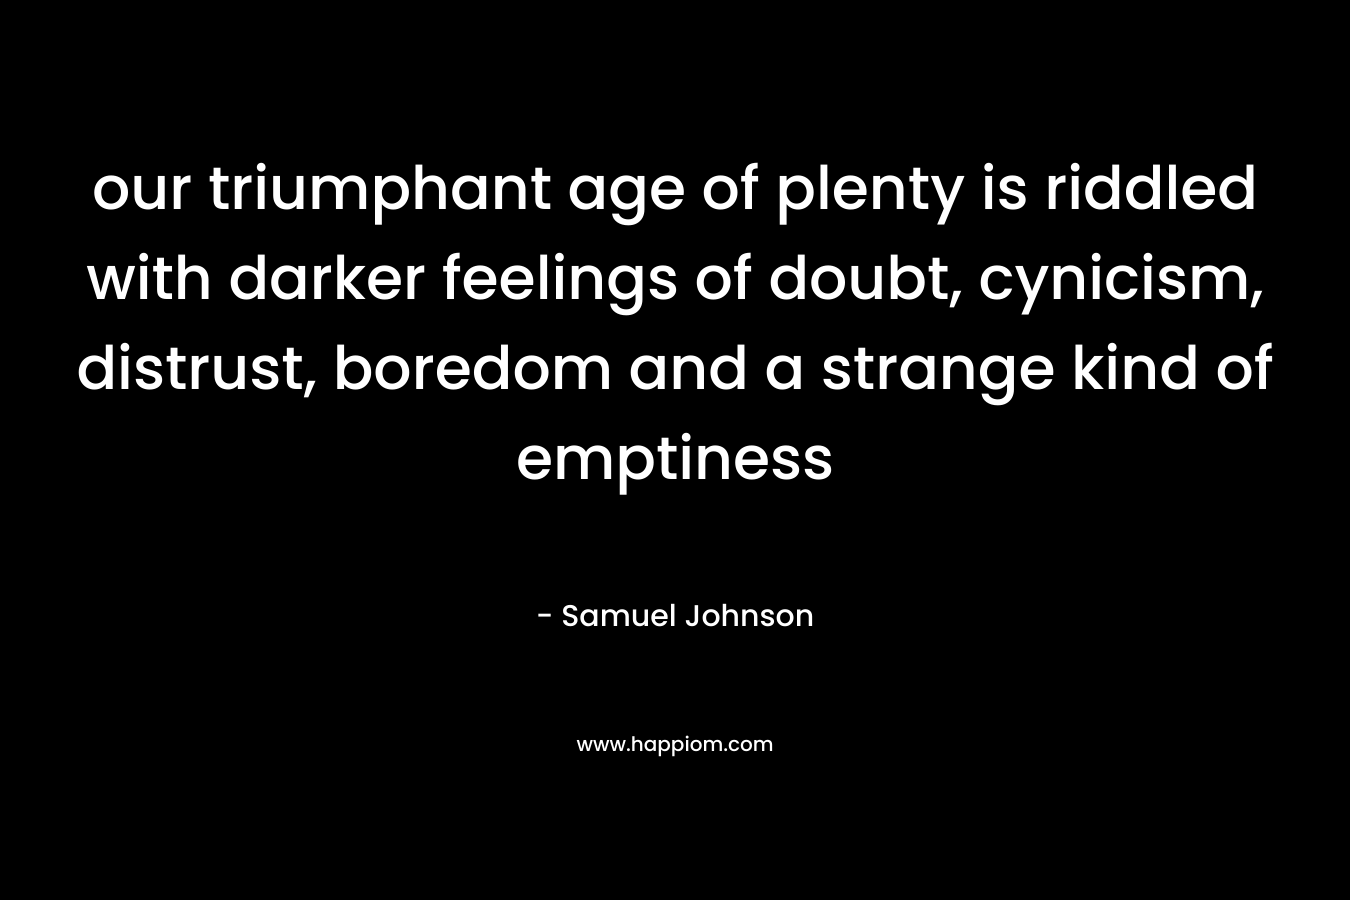 our triumphant age of plenty is riddled with darker feelings of doubt, cynicism, distrust, boredom and a strange kind of emptiness – Samuel Johnson